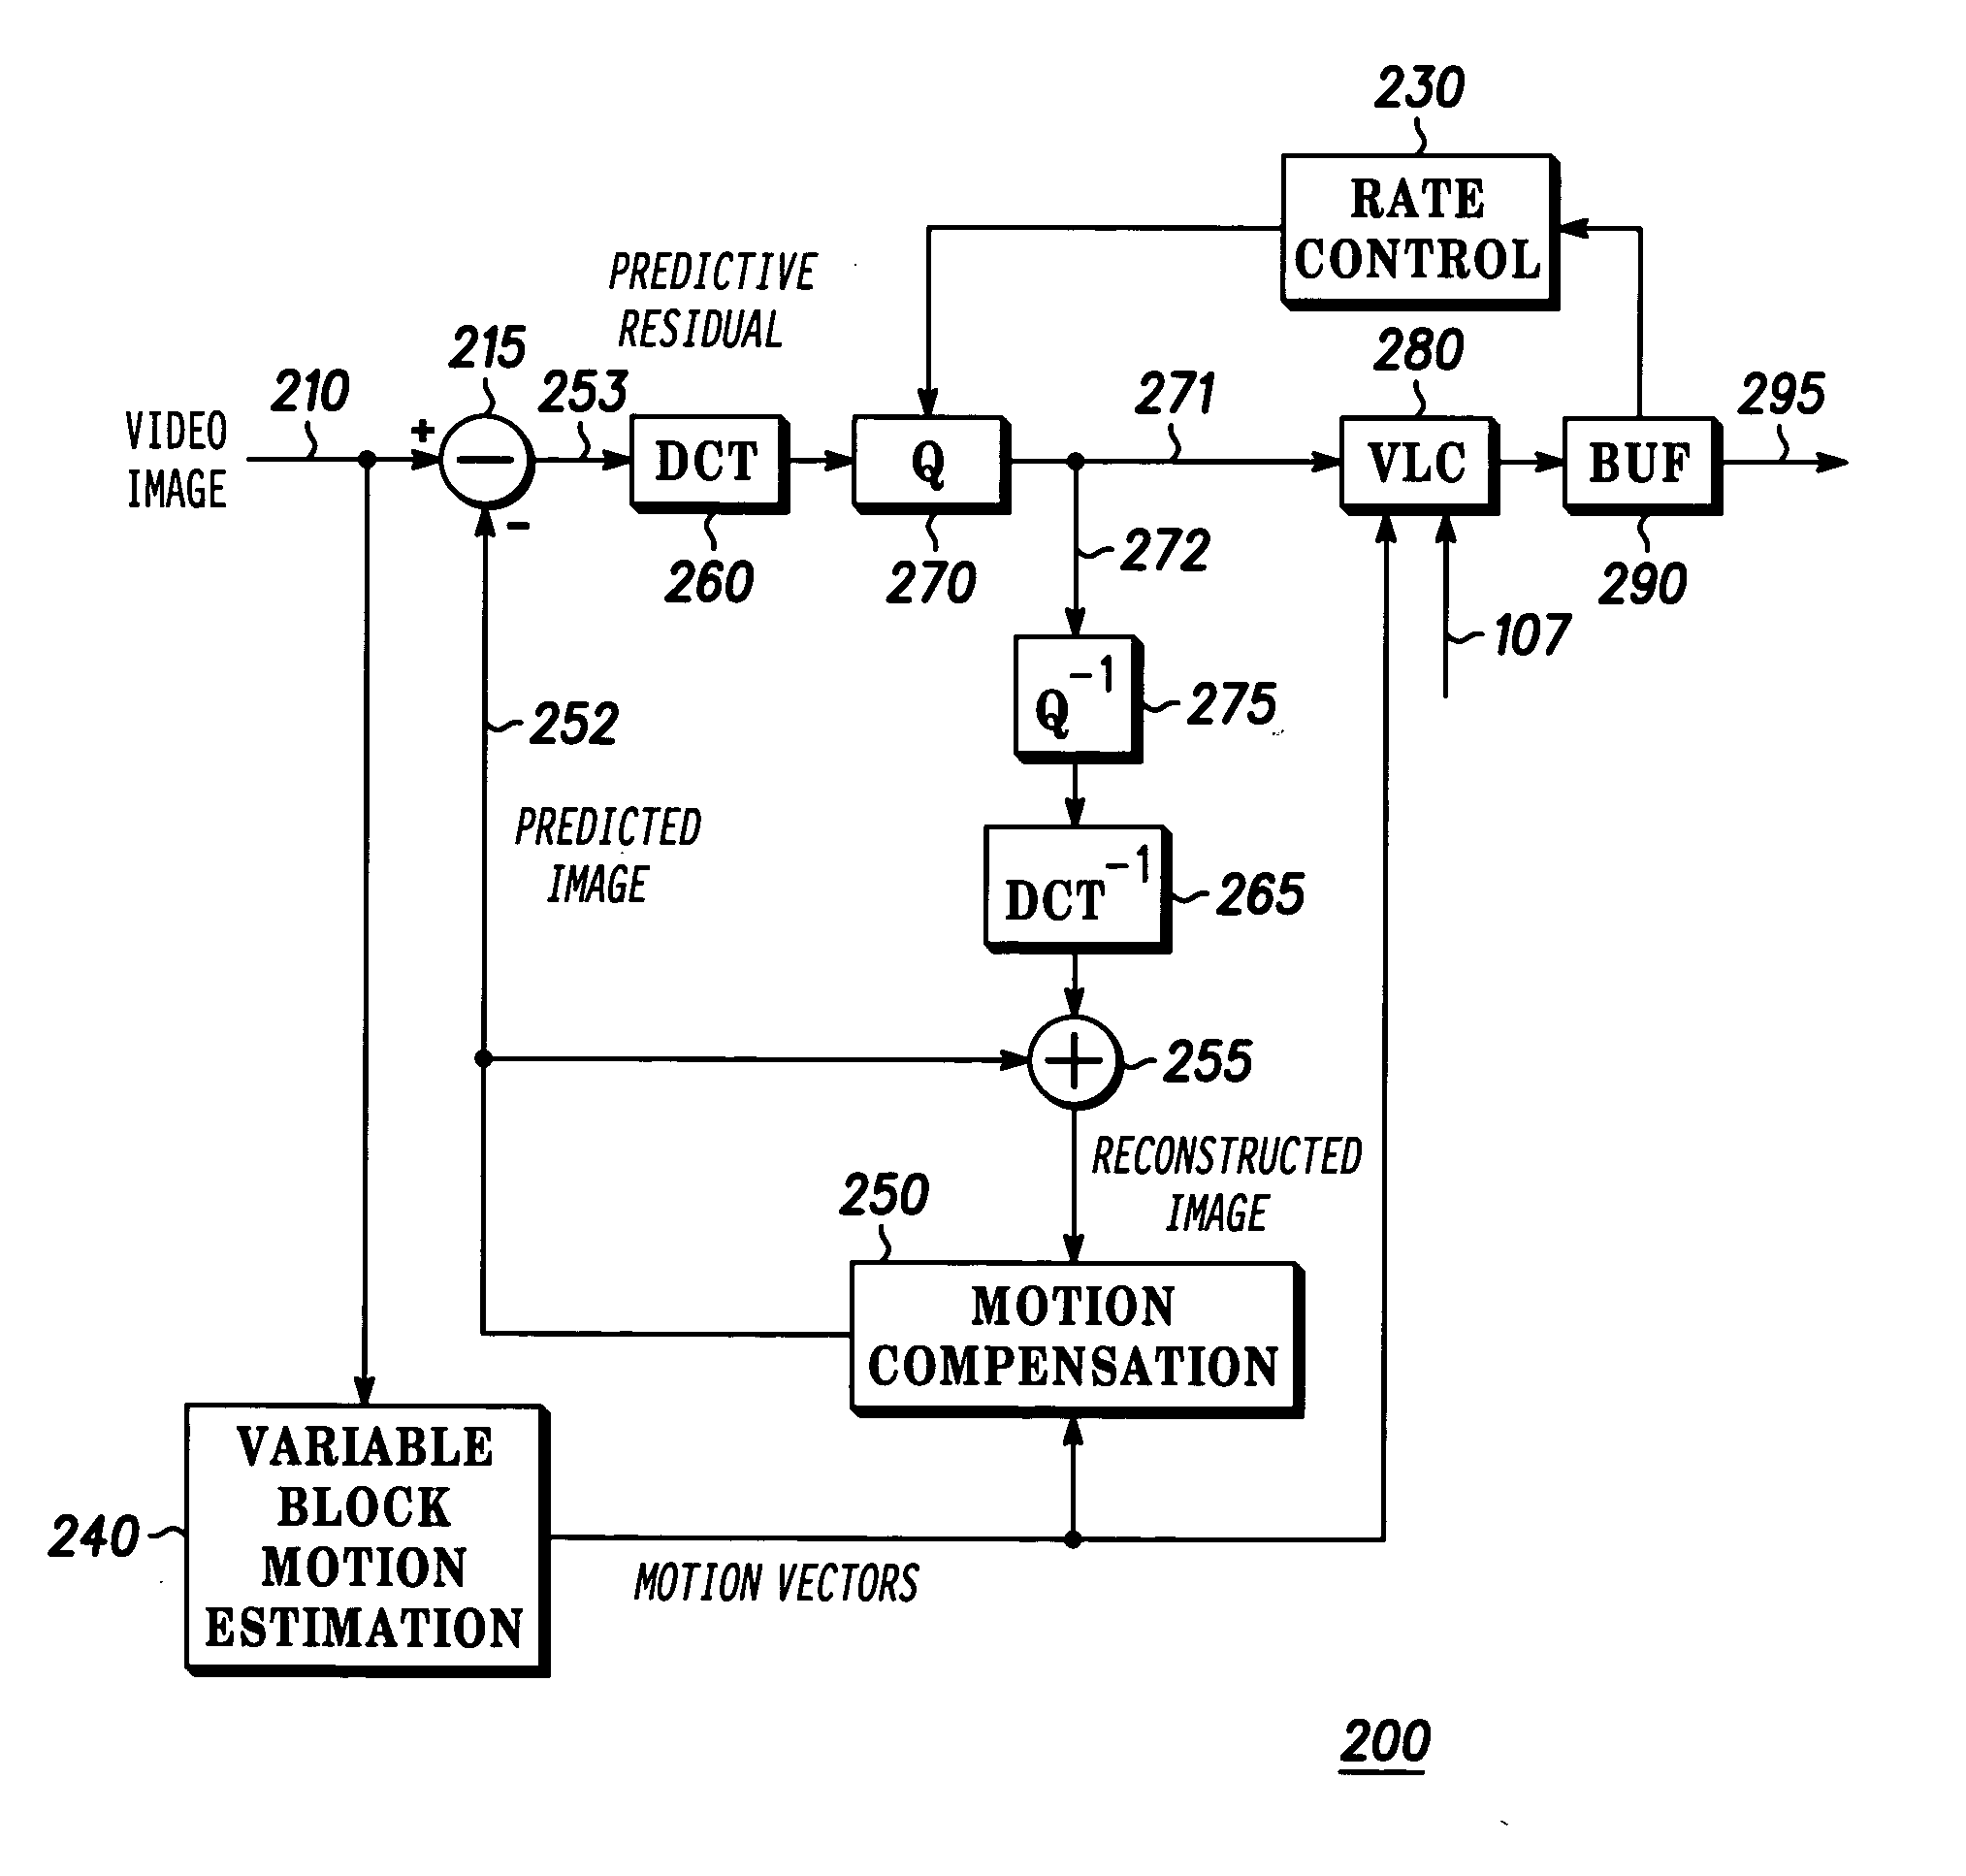 Method and apparatus for selection of scanning mode in dual pass encoding